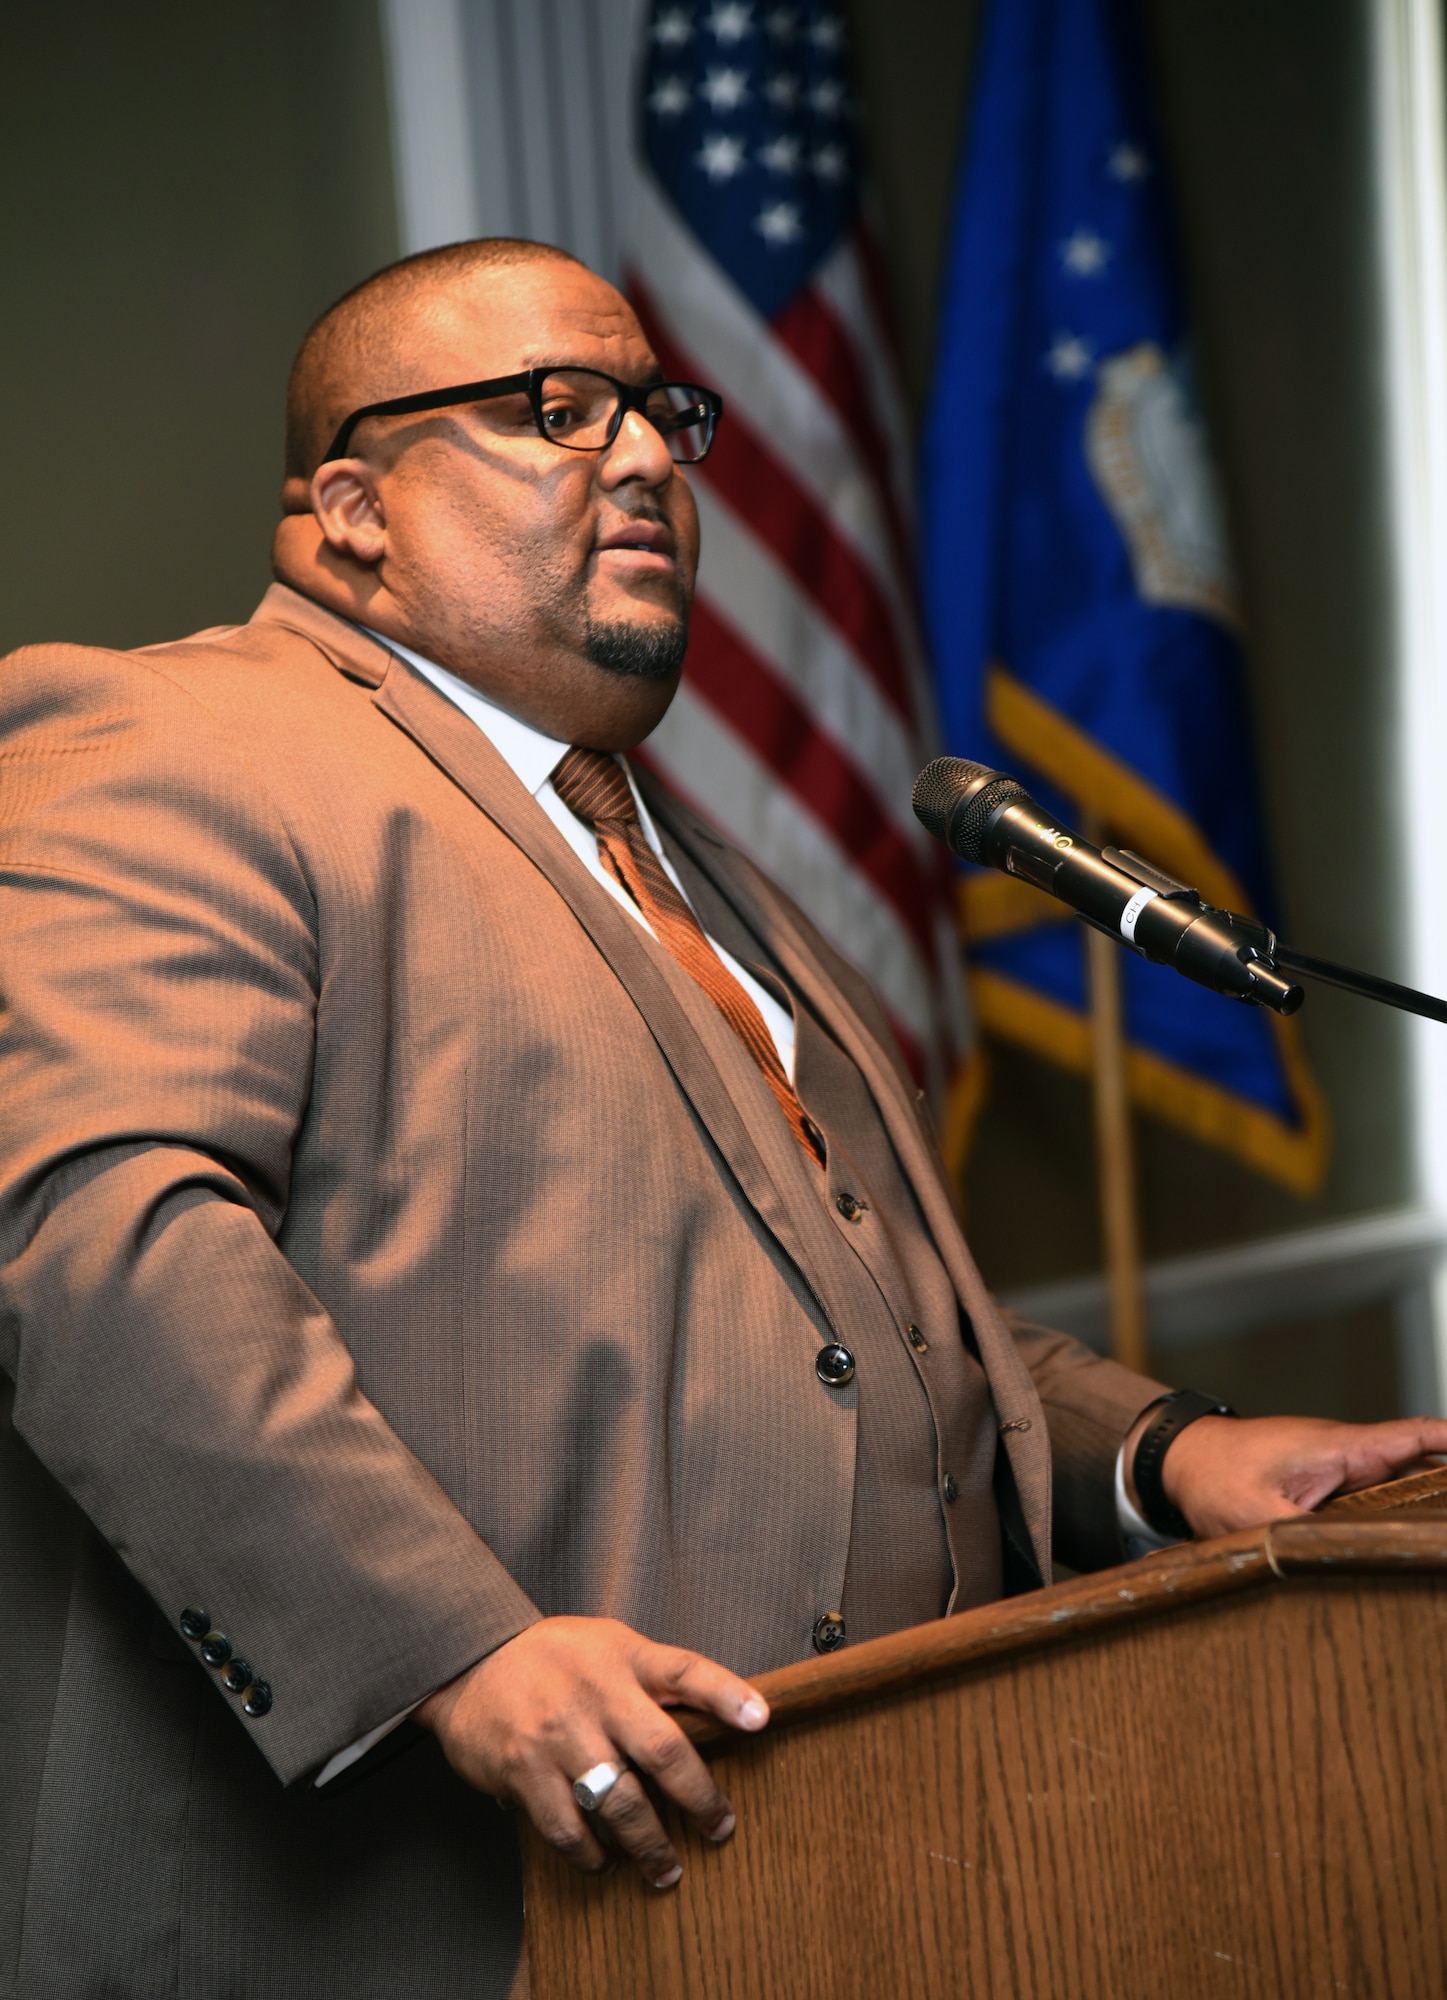 Rev. A. Byron Coleman III, with Fifth Street Missionary Baptist Church, was the guest speaker at the Black History Month Luncheon at the Tinker Club Feb. 21. Rev. Coleman also serves as an Adjunct Professor in the African/African-American Studies Program at the University of Oklahoma.